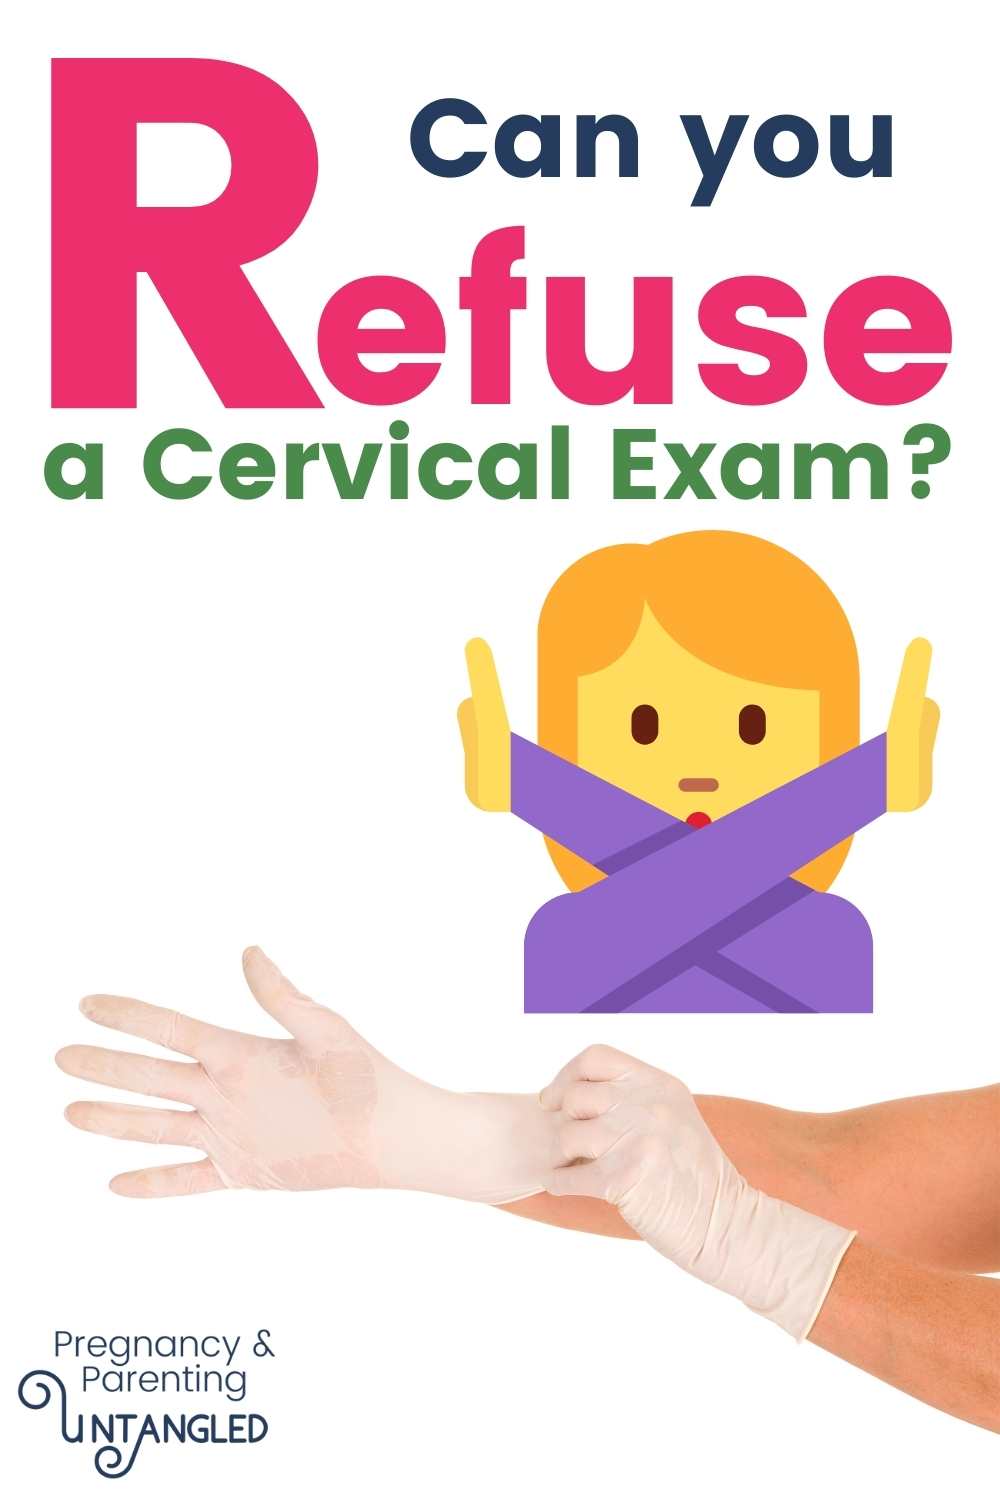 Can or should you refuse cervical exams in labor. What can you do to communicate your needs, but also do the things your body needs to have your baby. via @pullingcurls